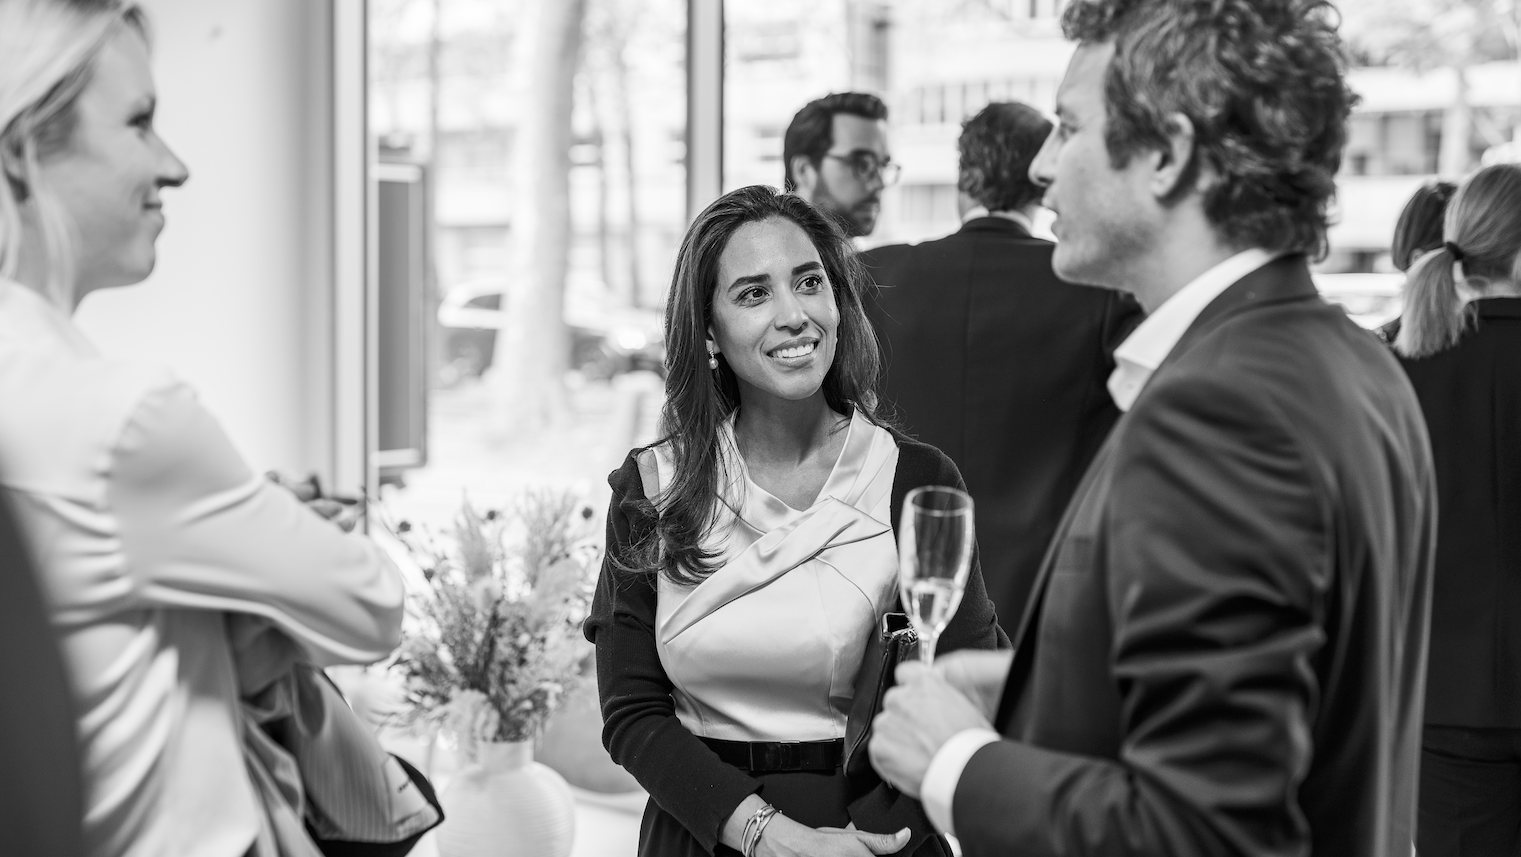 Belgium Sothebys Int. Realty Opening Event – NL